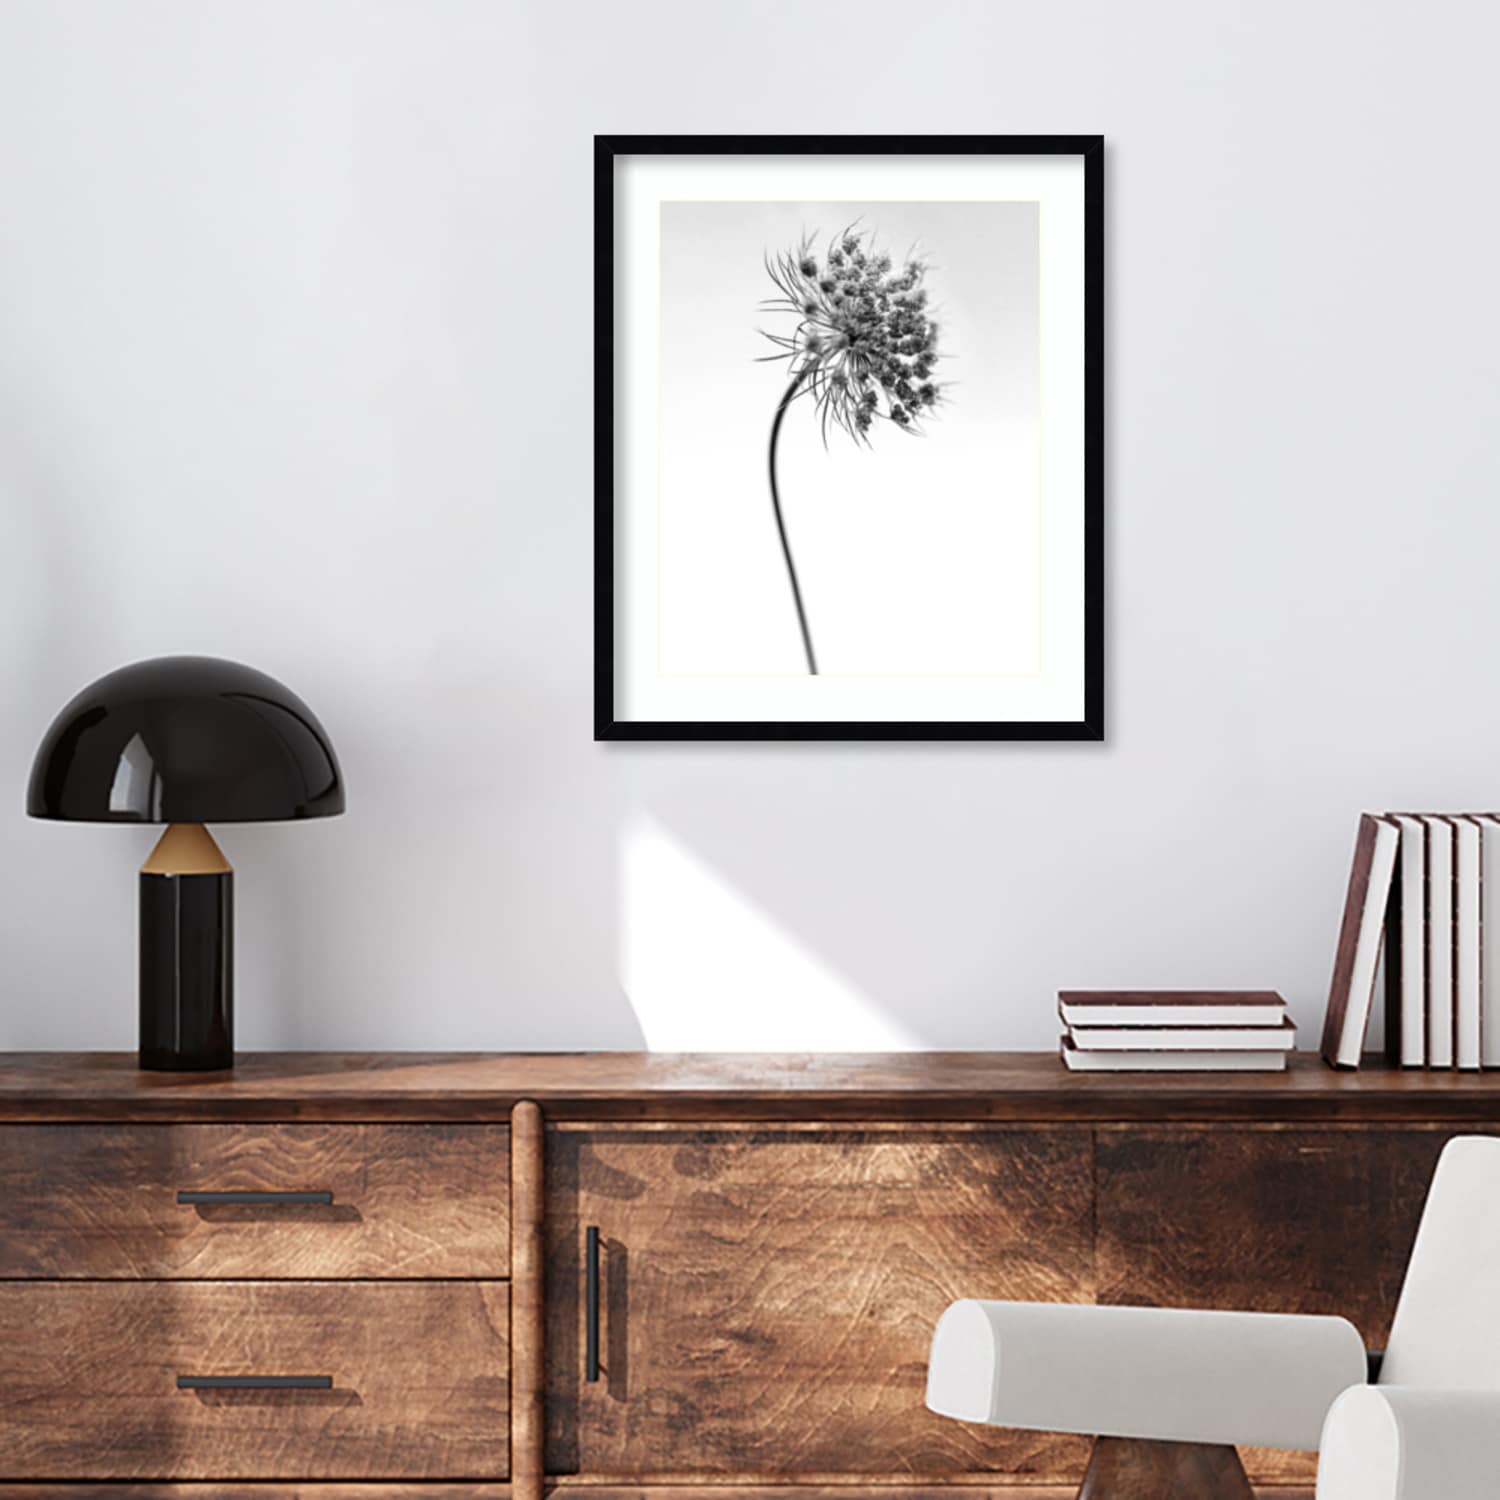 Amid the Flowers 52 by Teis Albers Wood Framed Wall Art Print